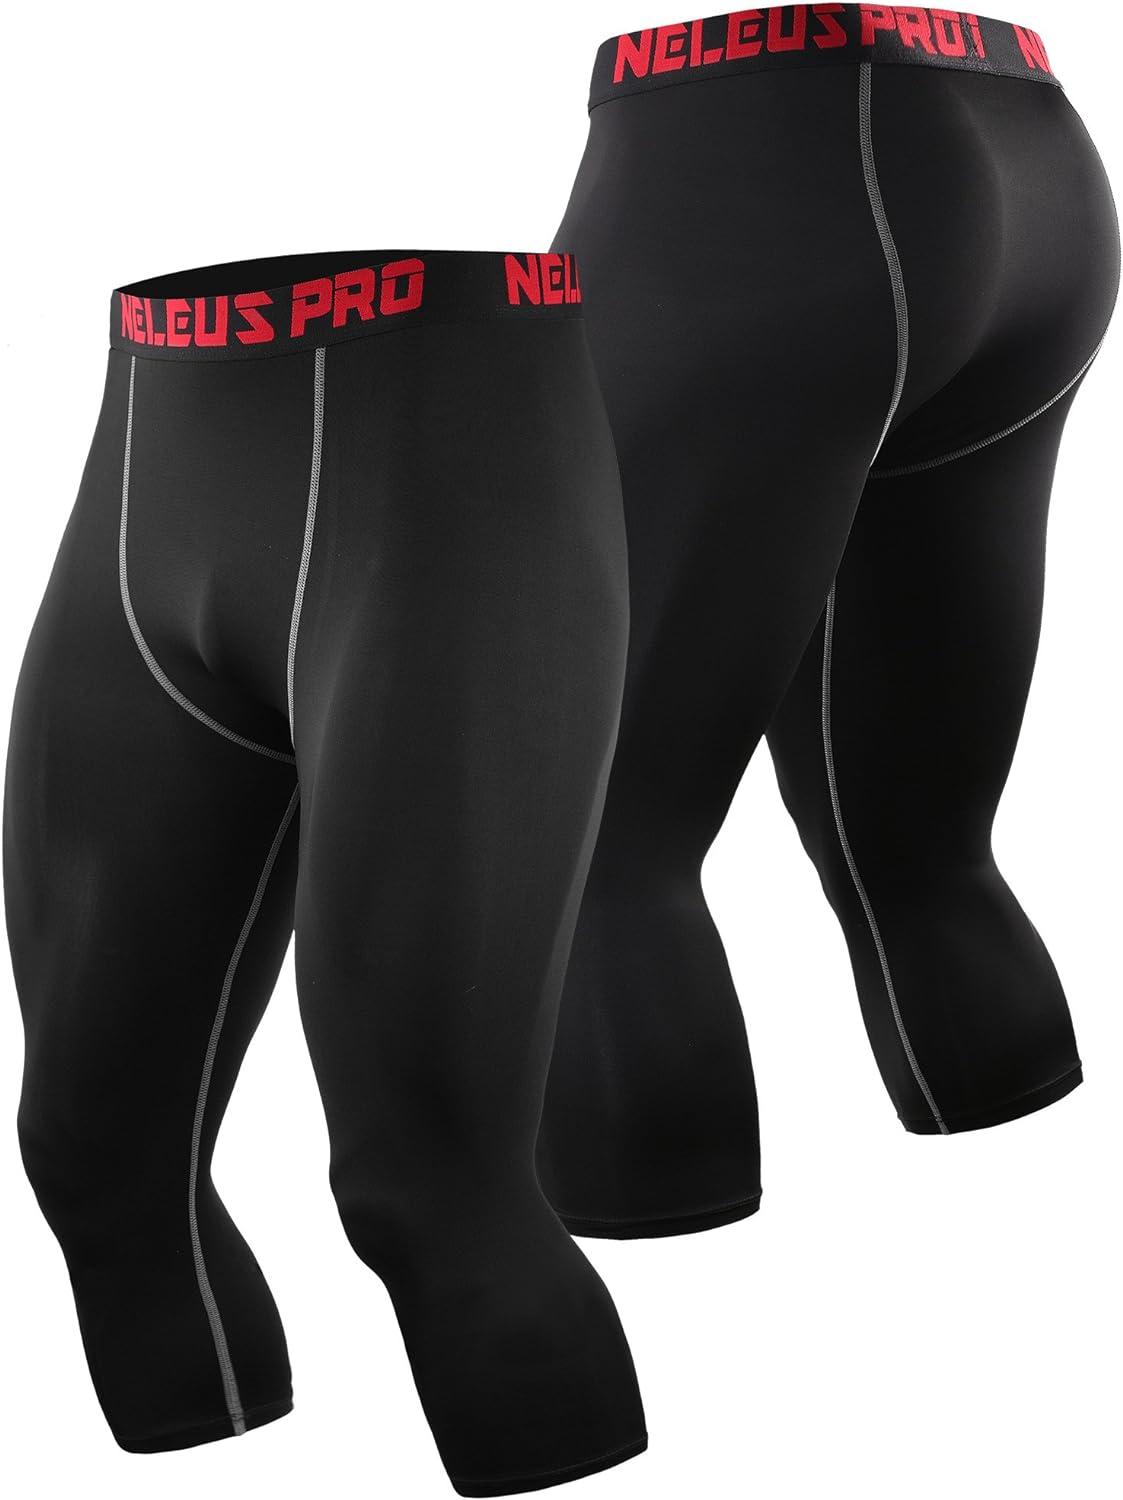 NELEUS Mens Dry Fit Compression Pants 2 Pack Running Tights